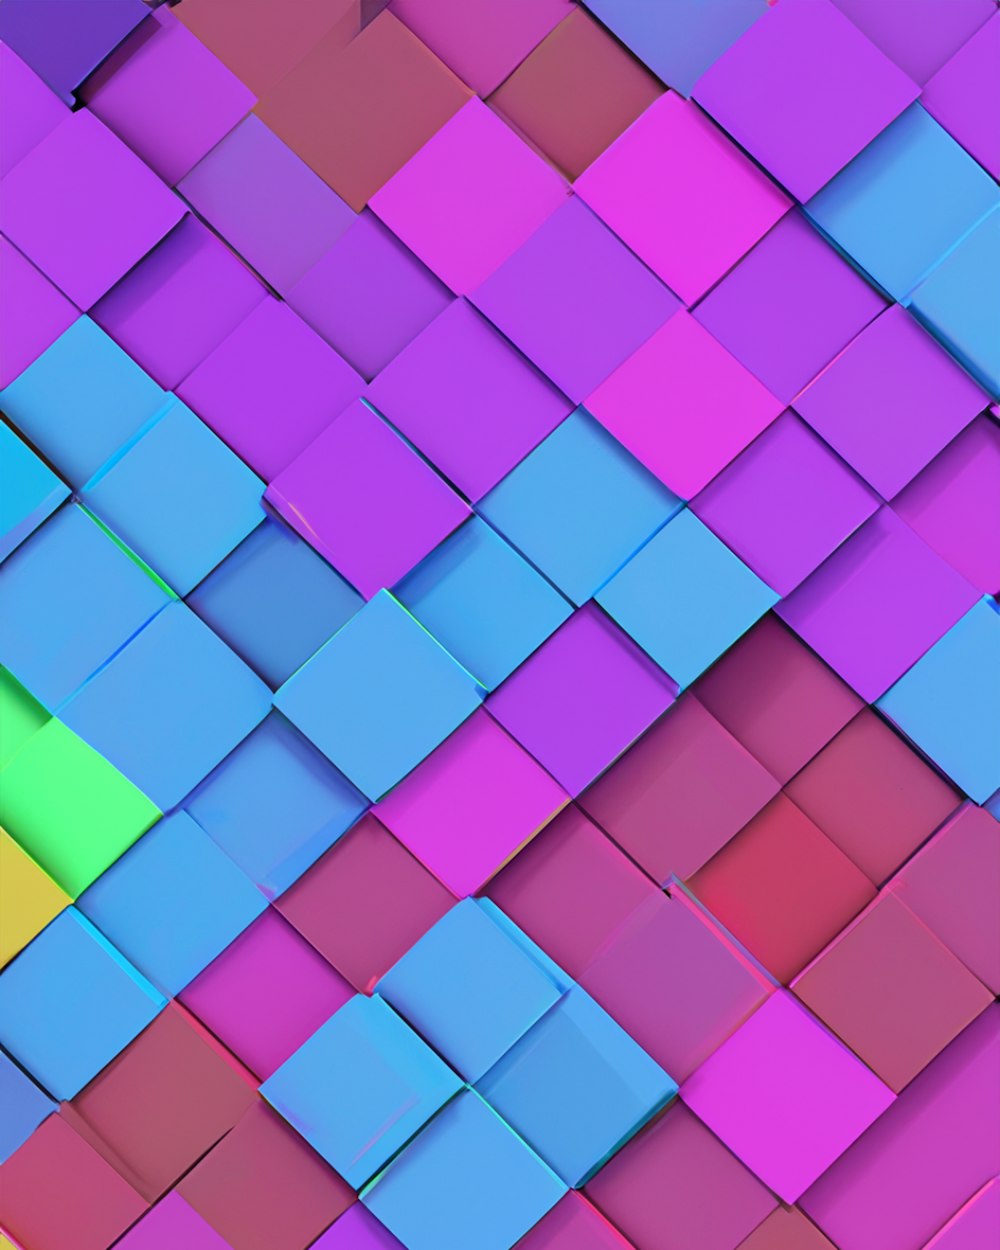 Colorful Background With Lines And Squares, Colorful, Lines